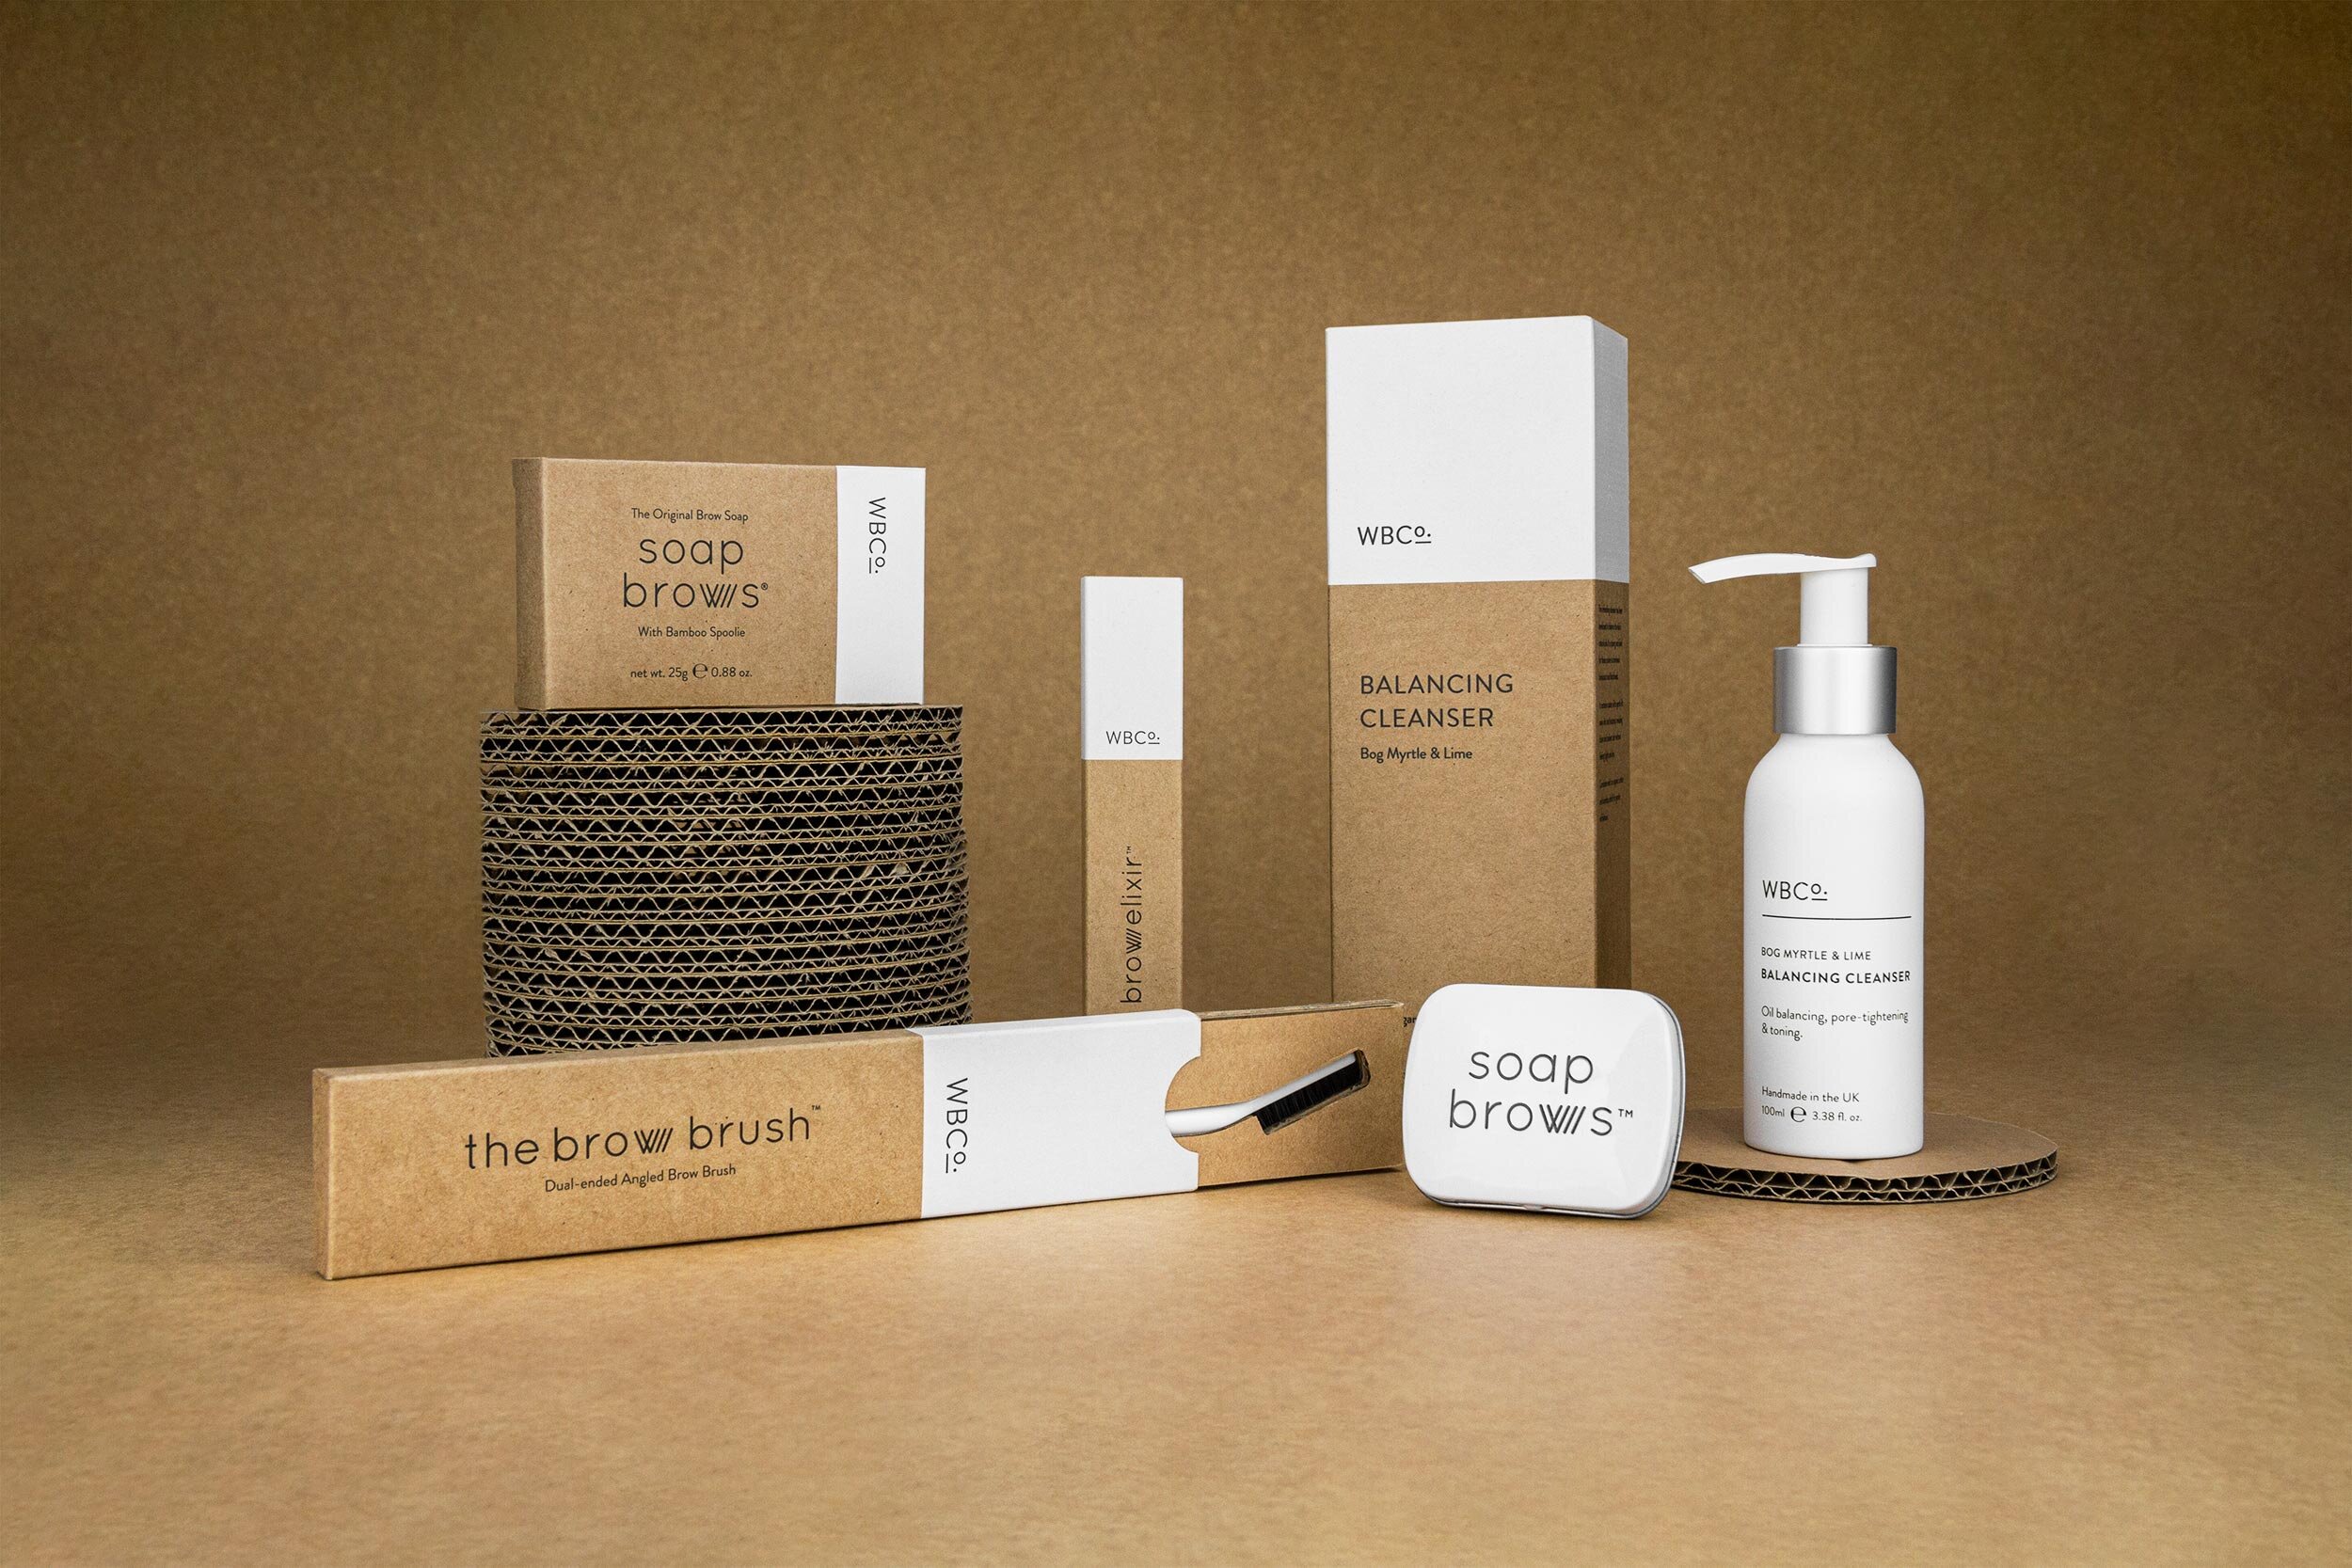 Cosmetic Packaging Ideas For Successful Beauty & Personal Care Brands